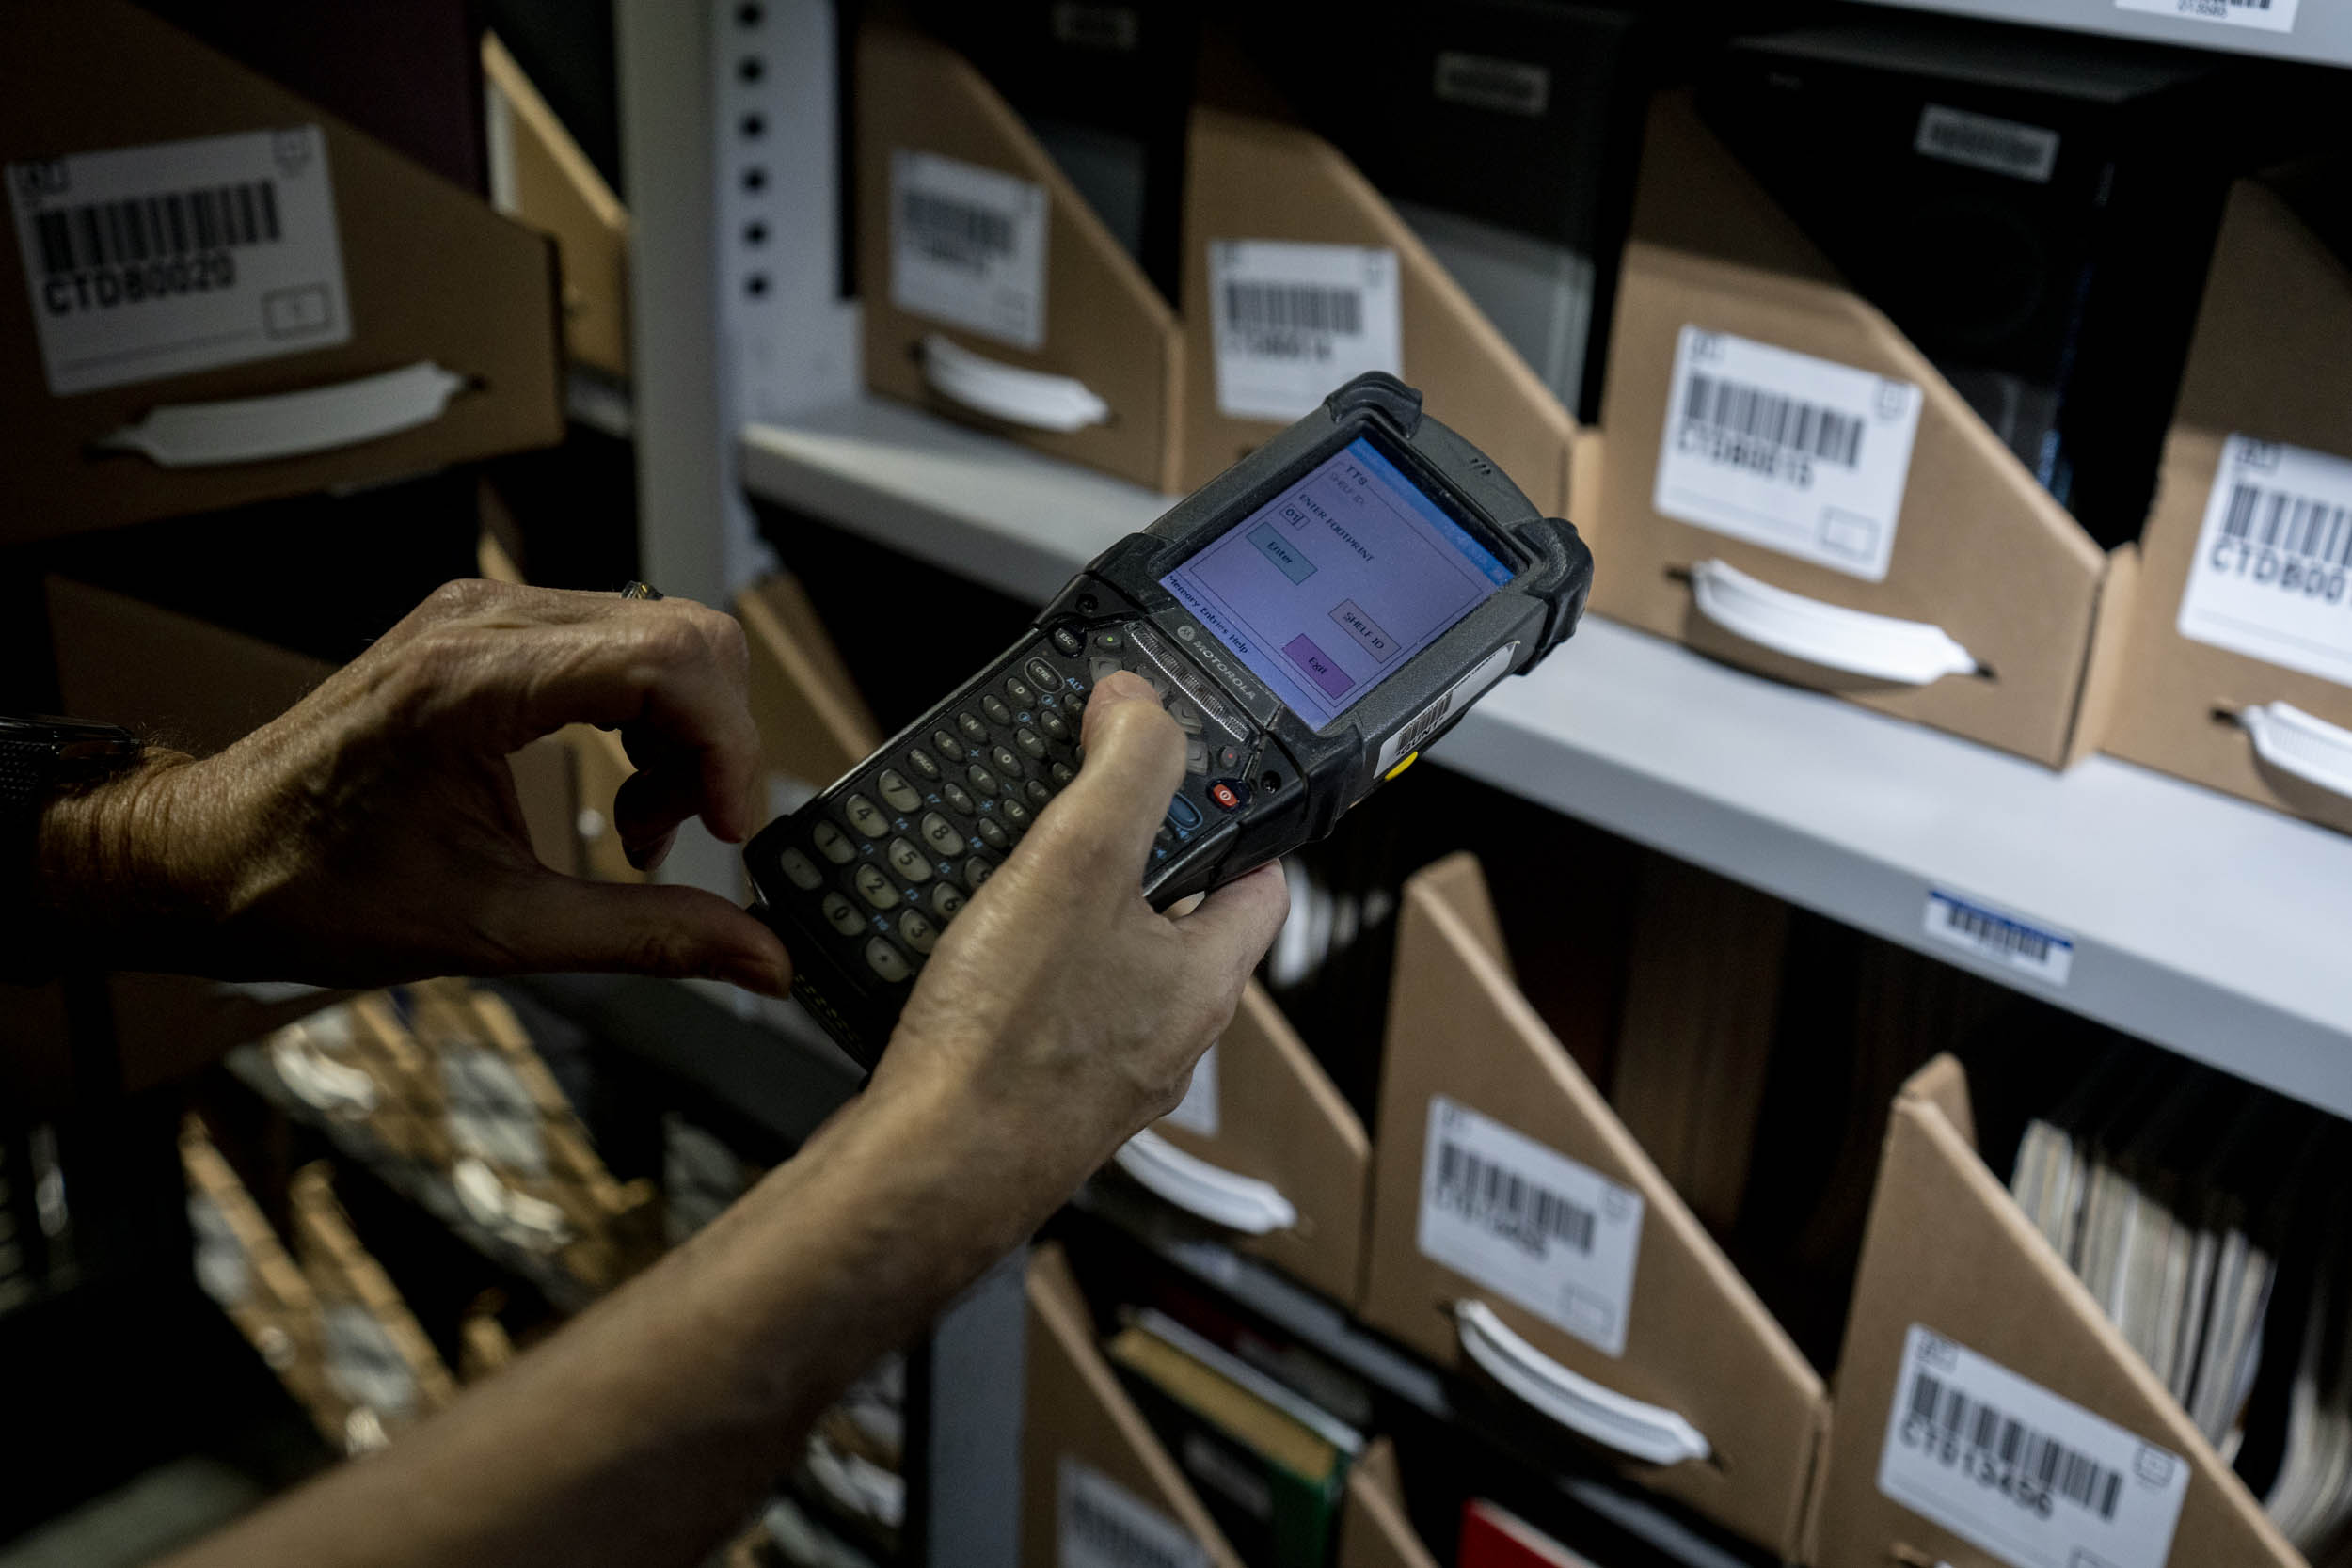 Person holding a hand held scanner to scan the barcodes on cardboard containers